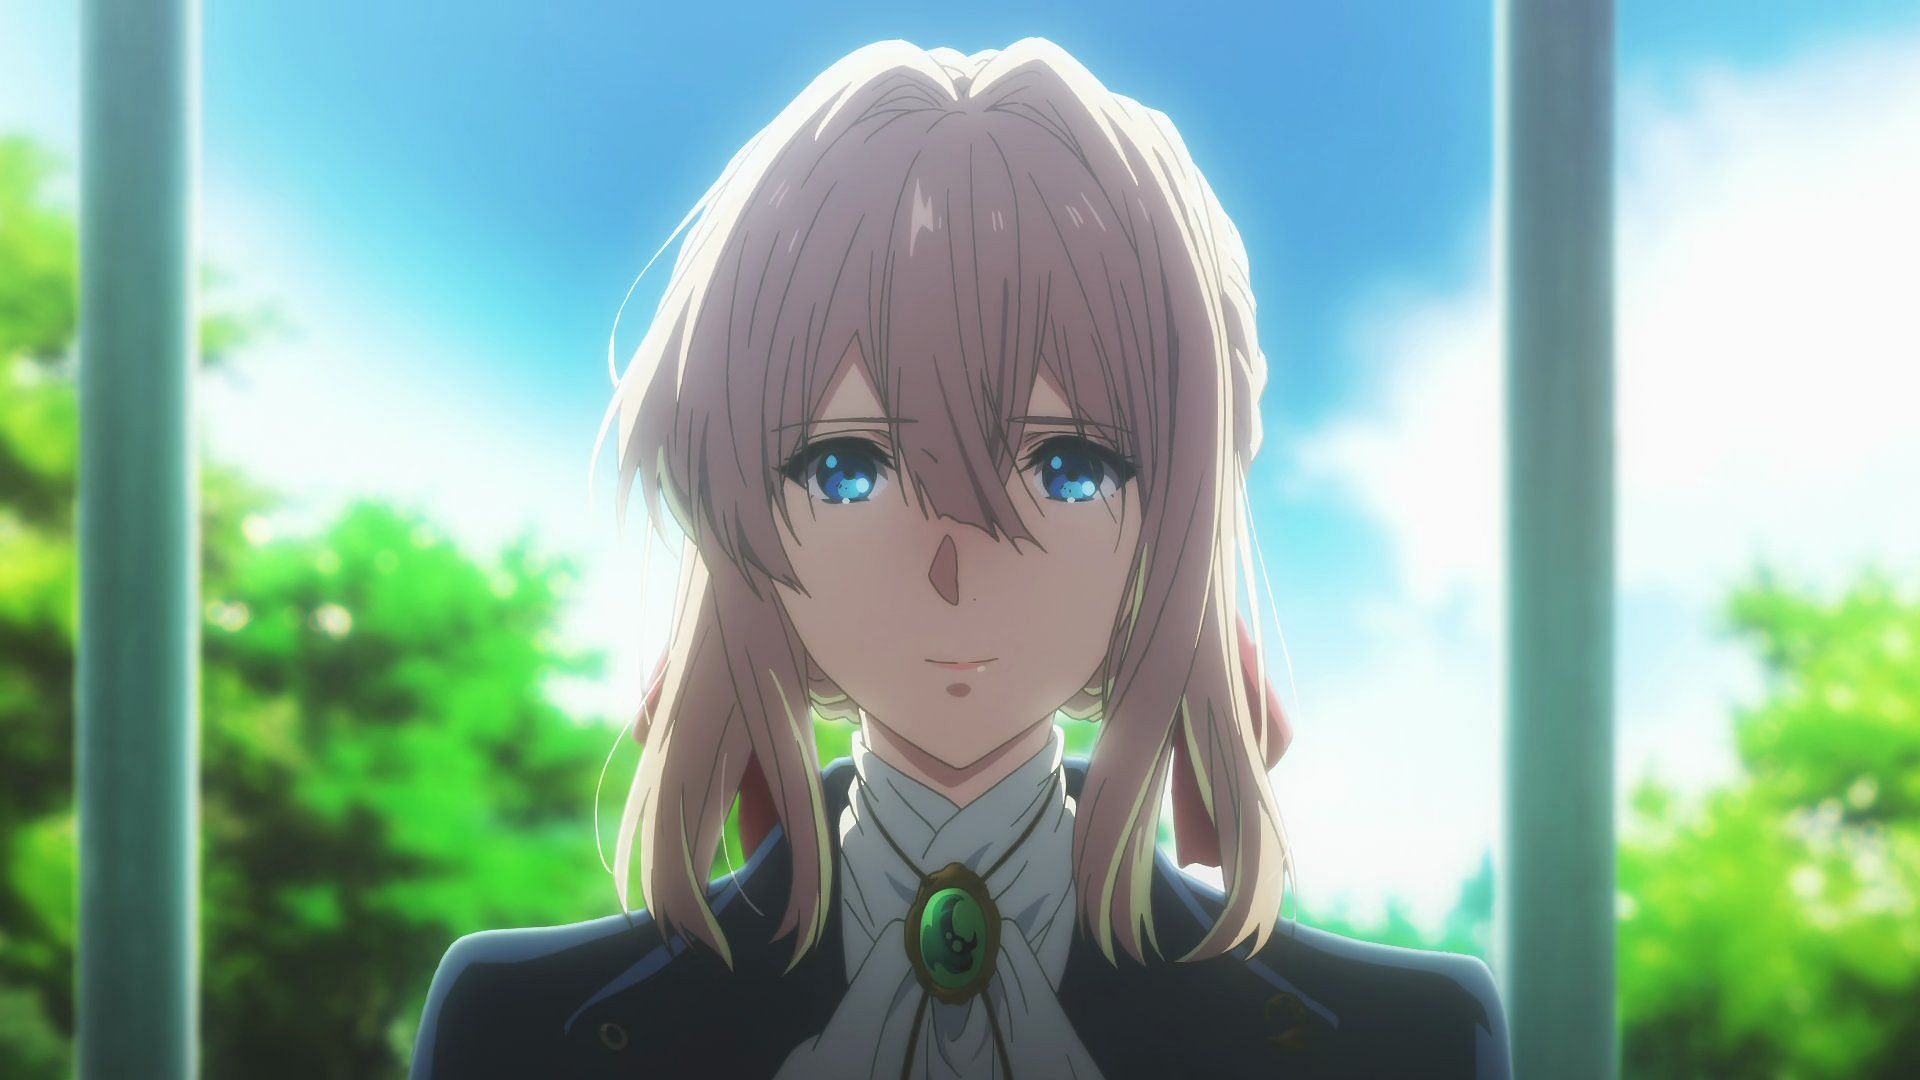 All the parallels between Your Lie in April and Violet Evergarden